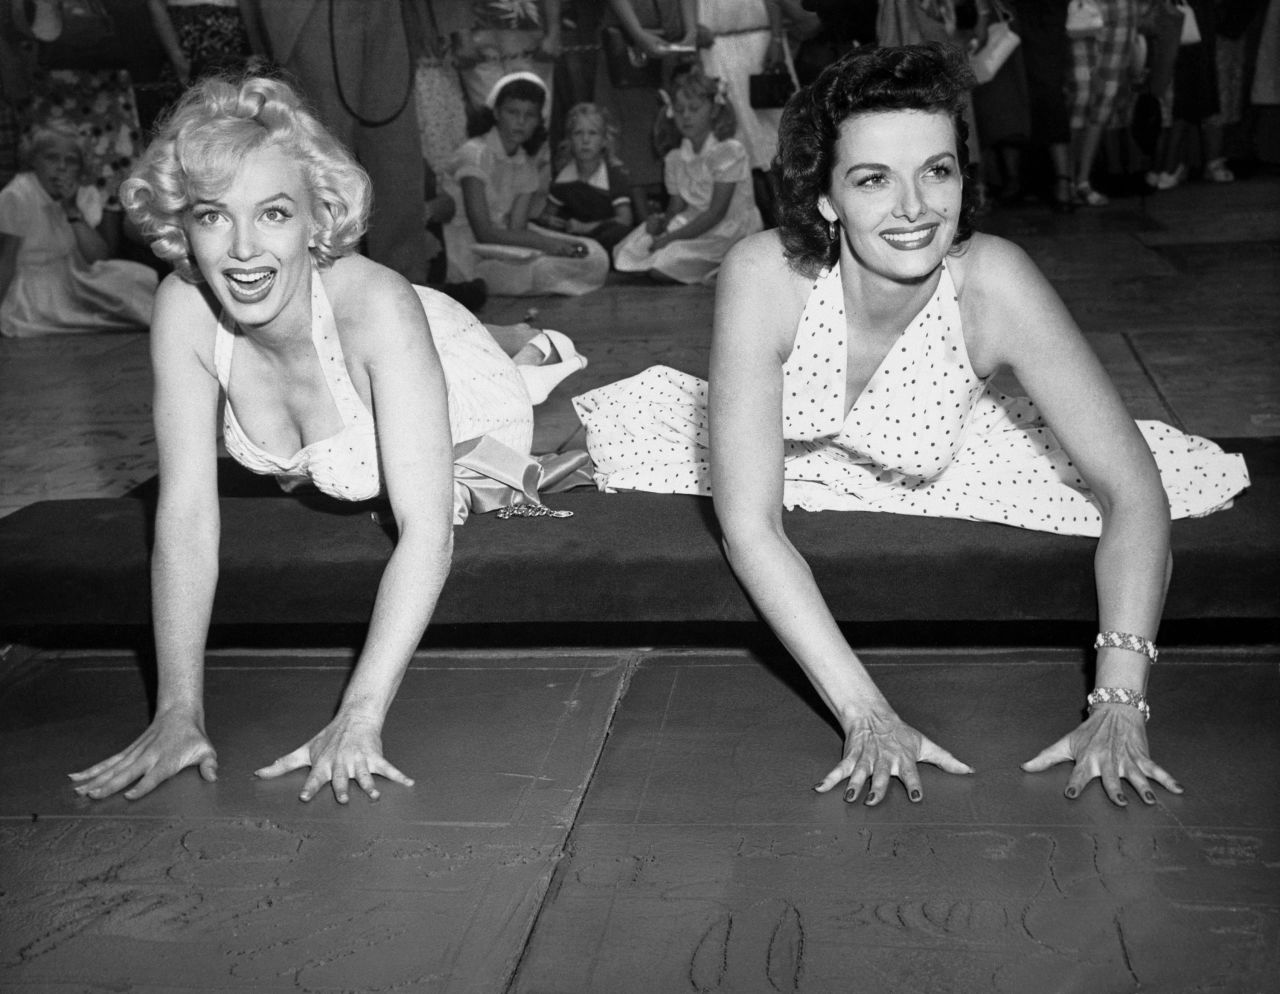 Monroe and "Gentlemen Prefer Blondes" co-star Jane Russell place their hands in cement at Grauman's Chinese Theatre. The musical comedy topped the box office in 1953.